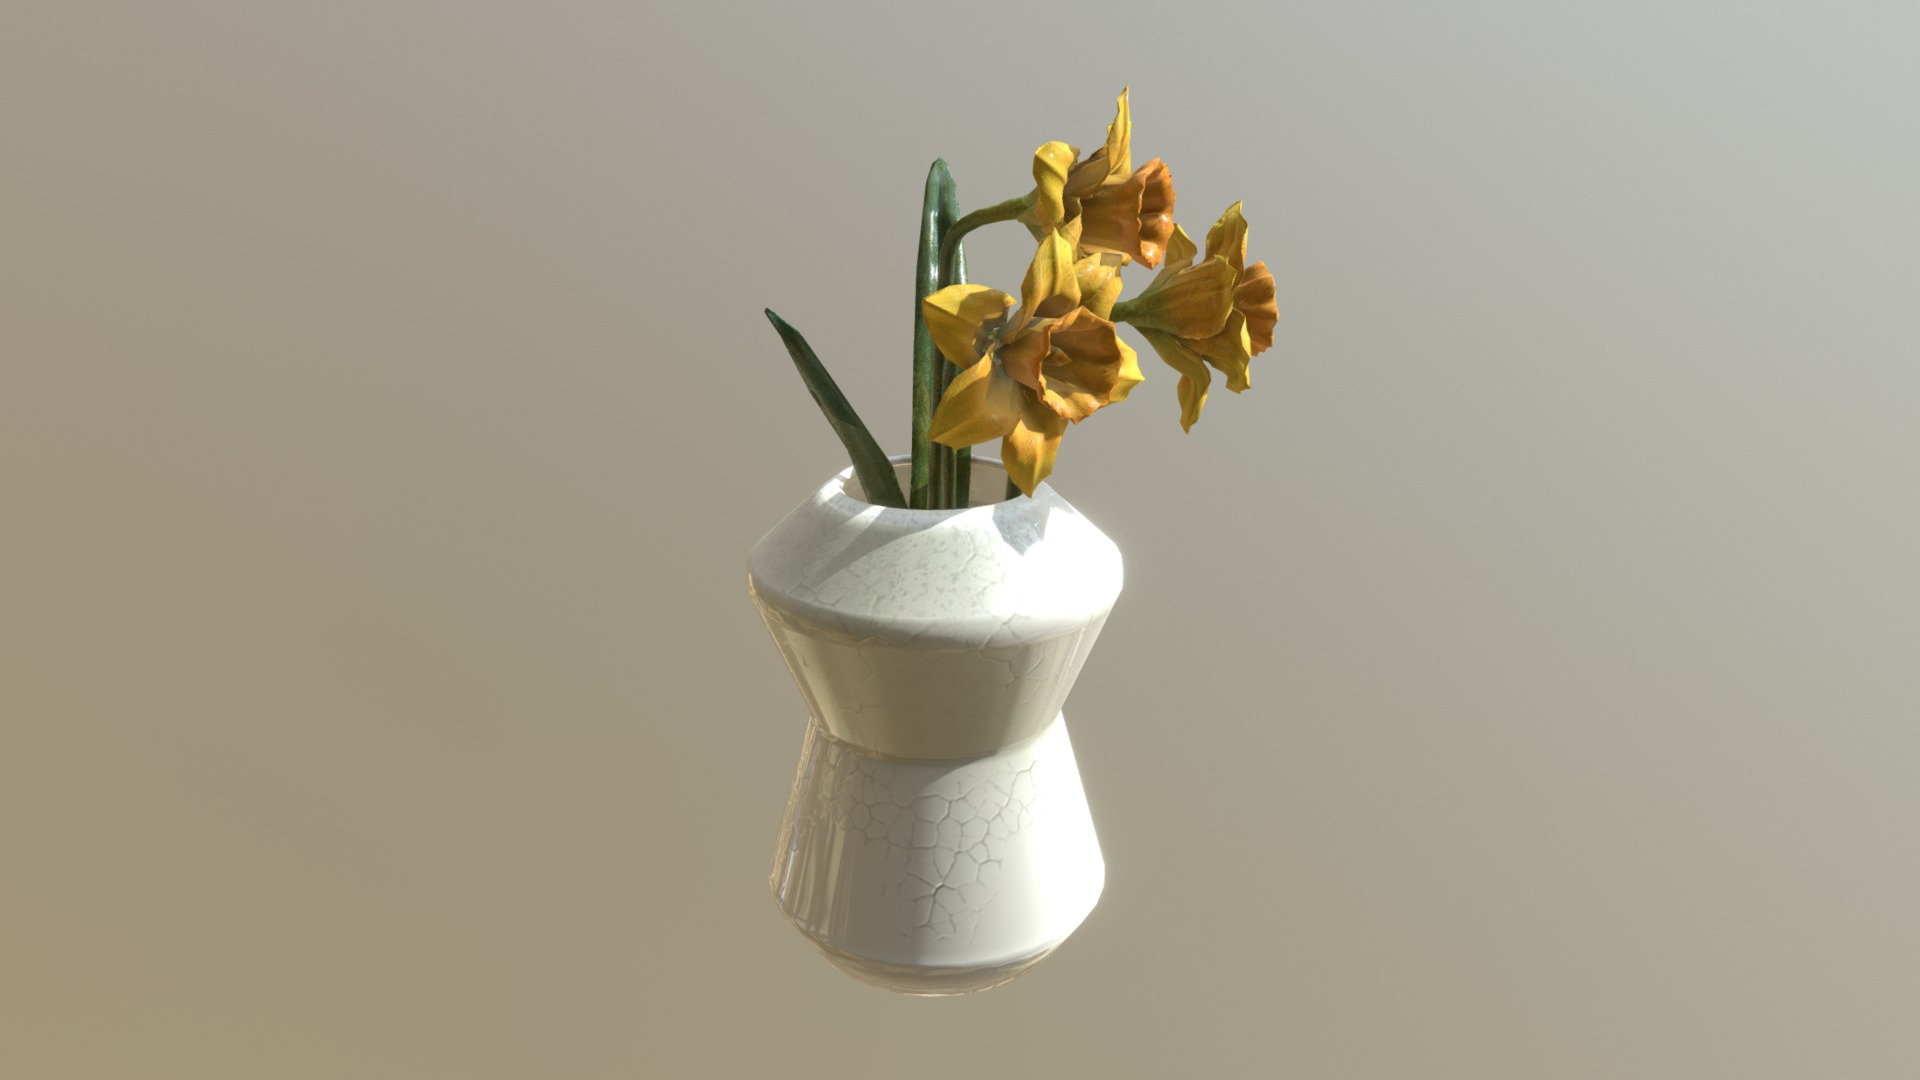 3D model Daffodils - This is a 3D model of the Daffodils. The 3D model is about a vase with yellow flowers.